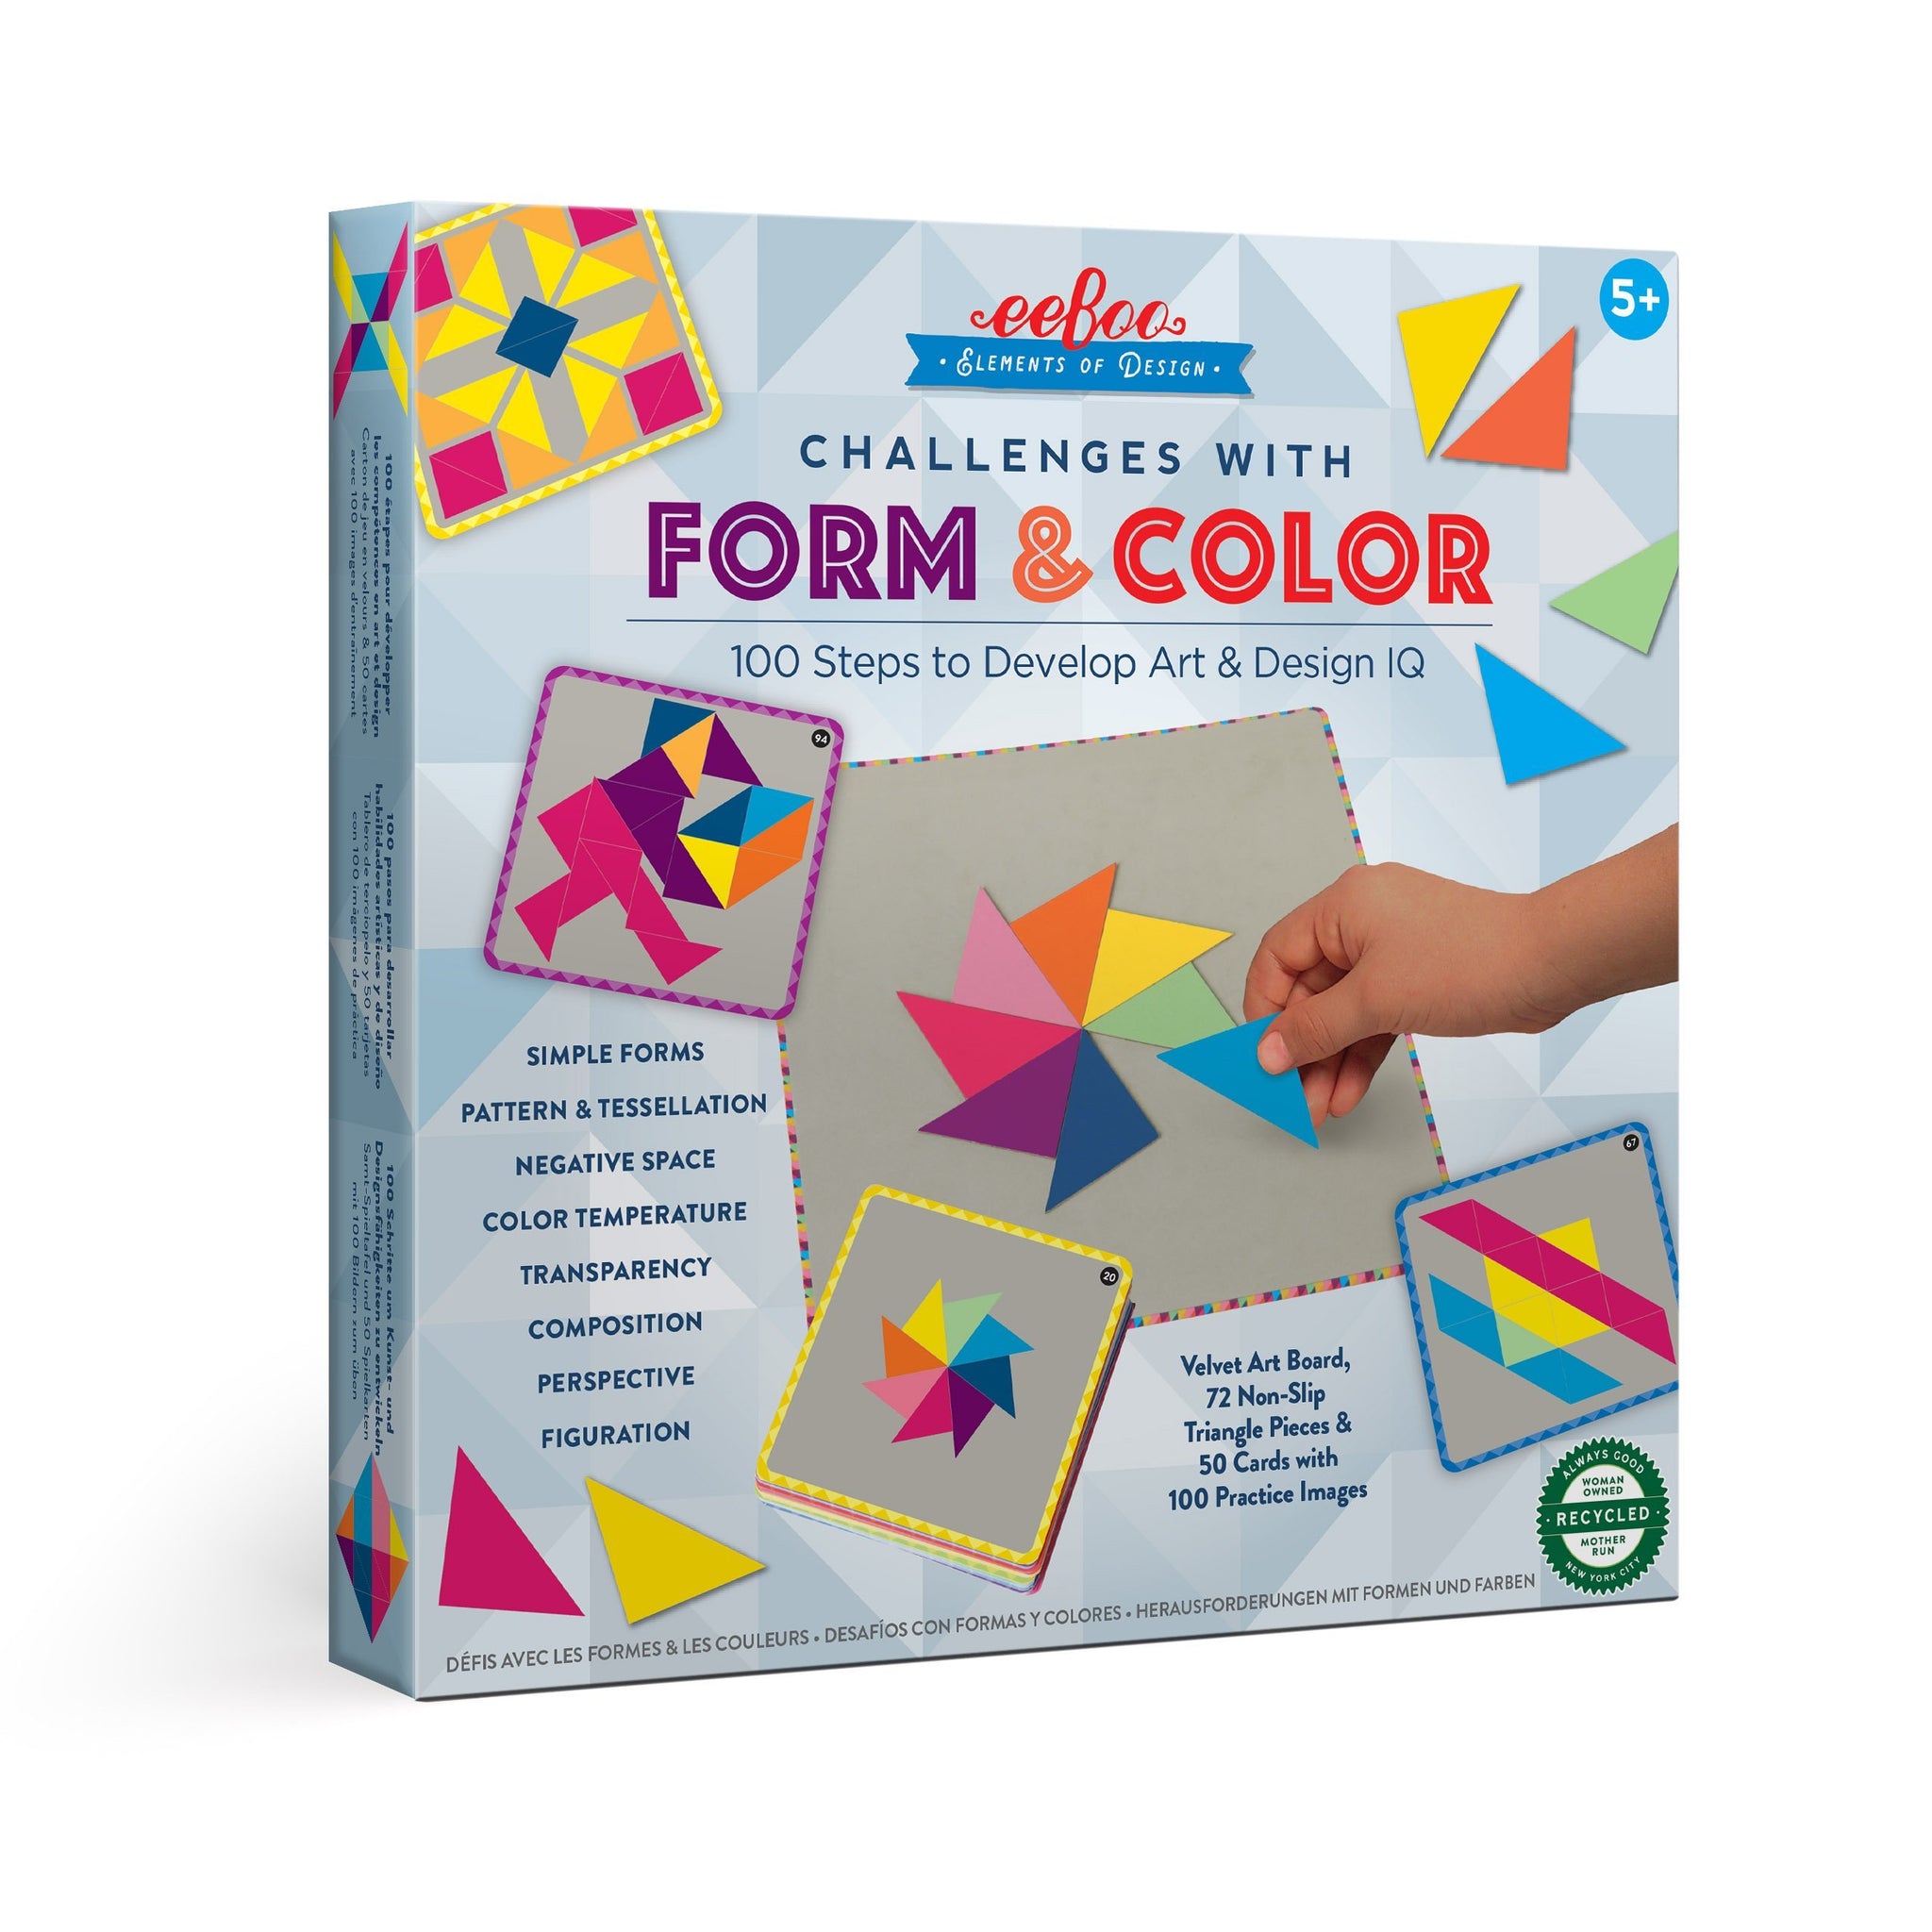 Challenges with Form & Color